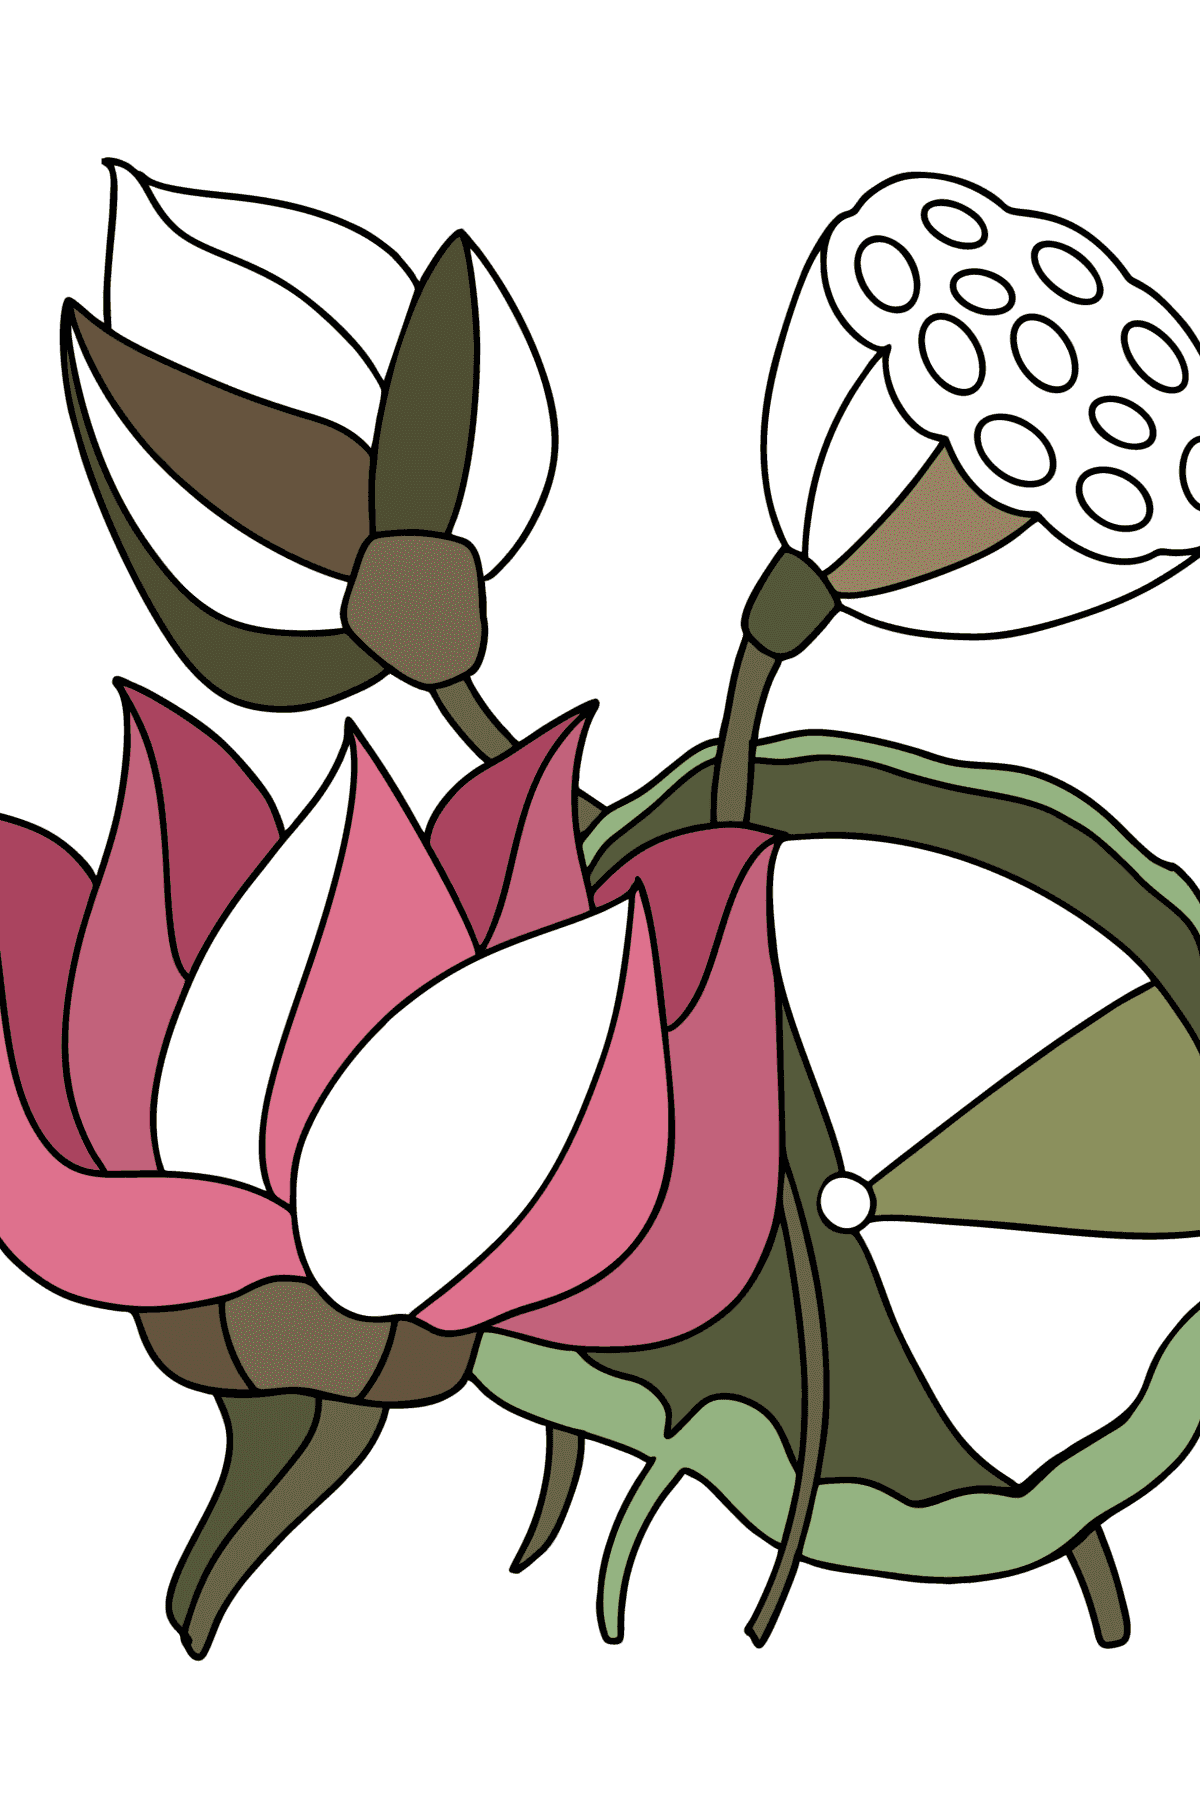 Lotus coloring page - Coloring Pages for Kids